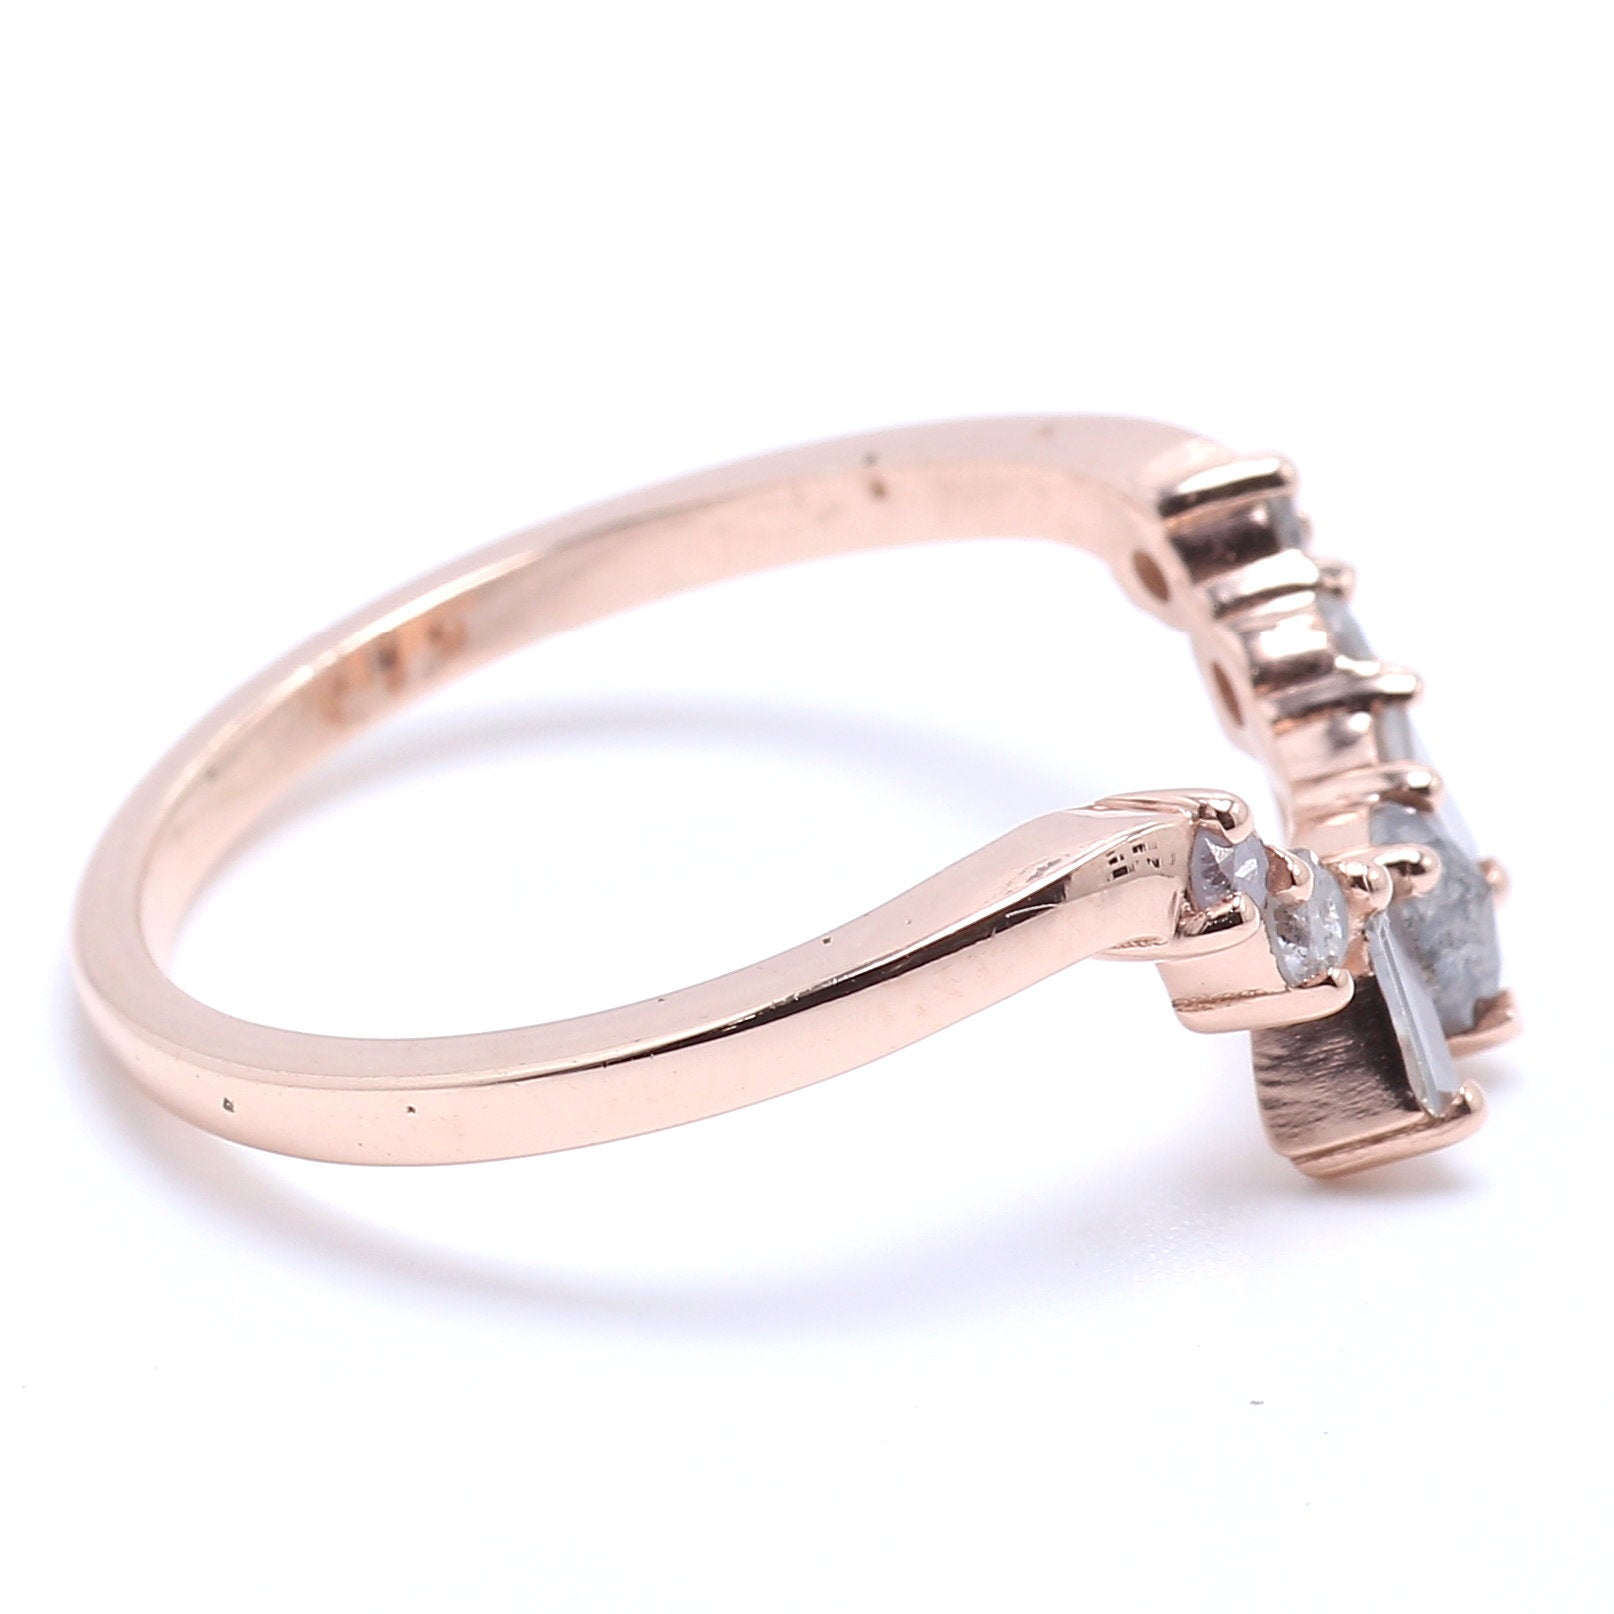 Salt And Pepper Pear Diamond 14K Rose Gold Ring Band Engagement Wedding Gift Band kd834